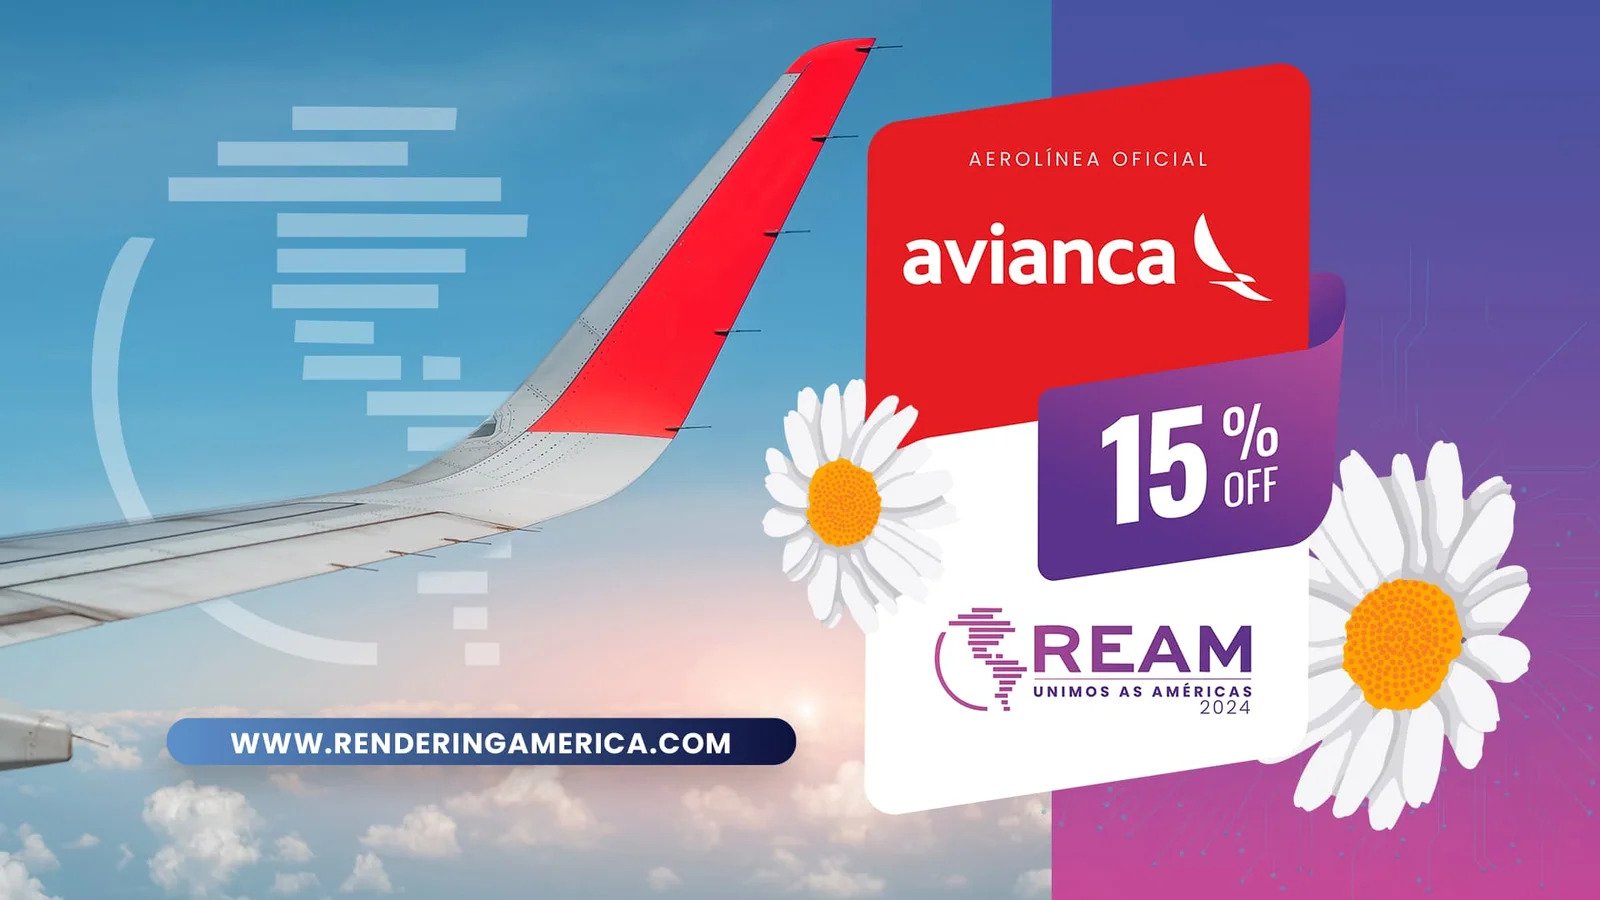 REAM 2024: Participants Get Exclusive Discounts on Flights and Hotels!